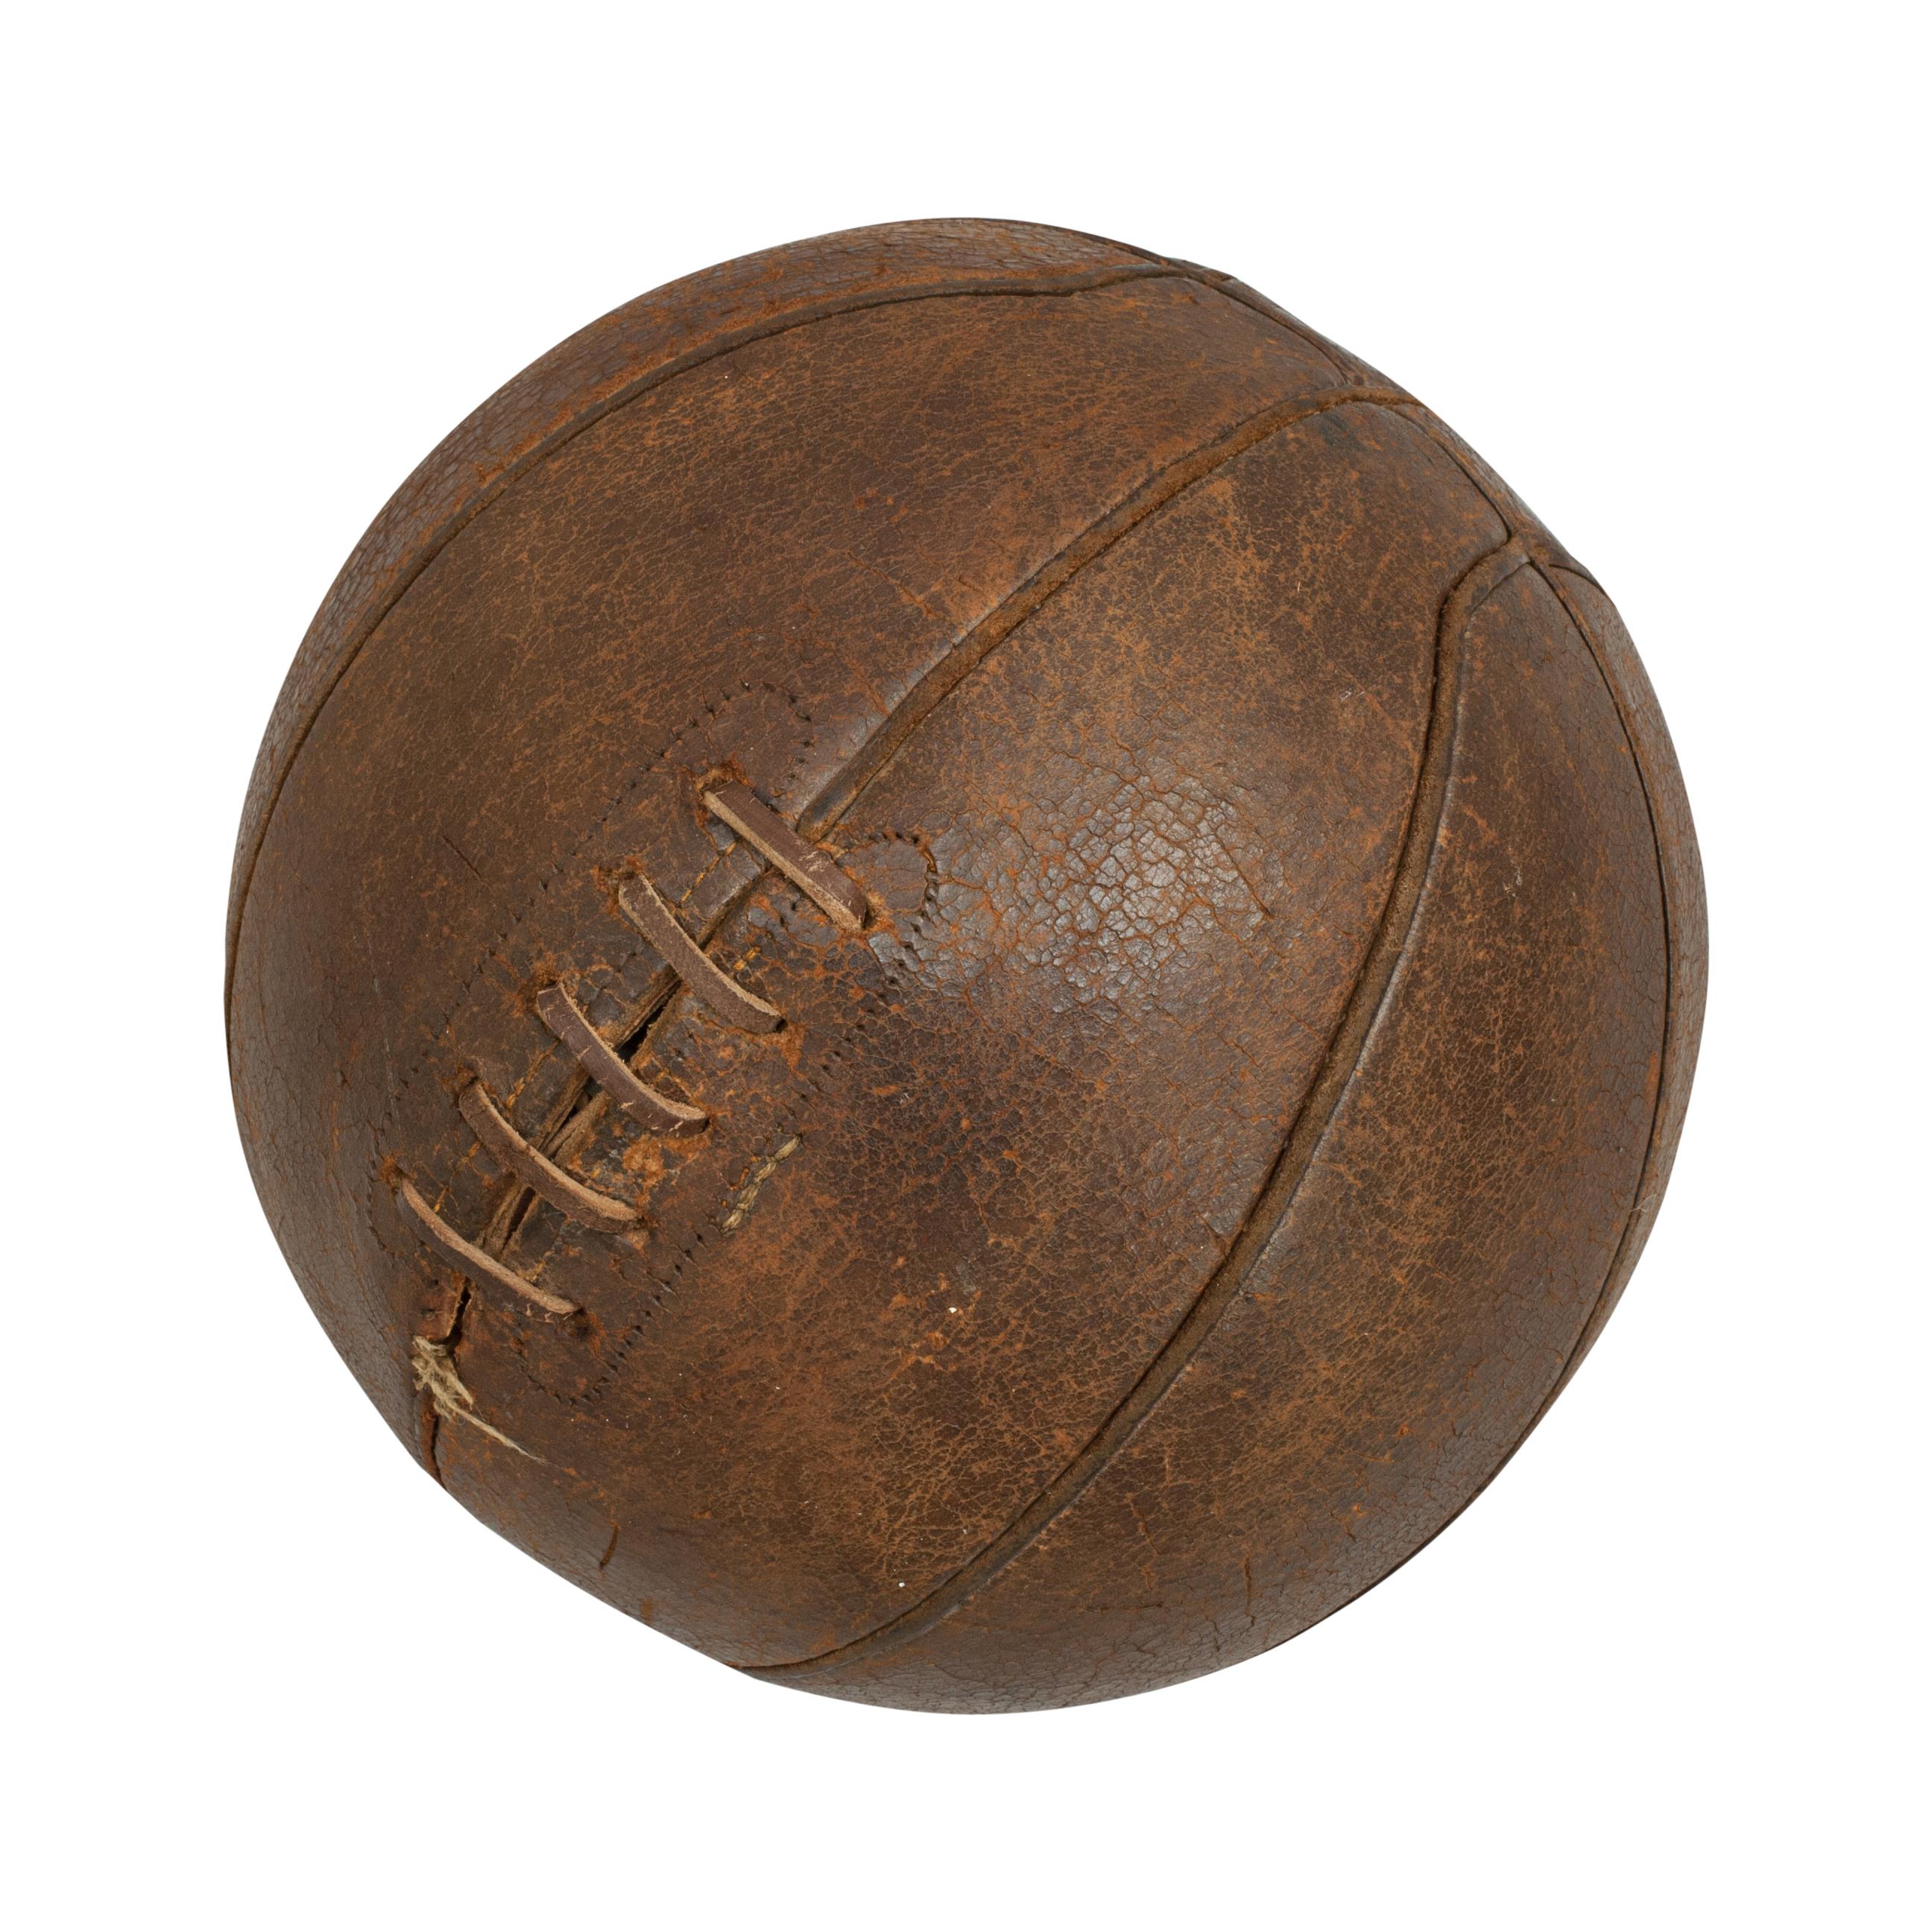 19th Century Antique Leather Basketball or Netball.